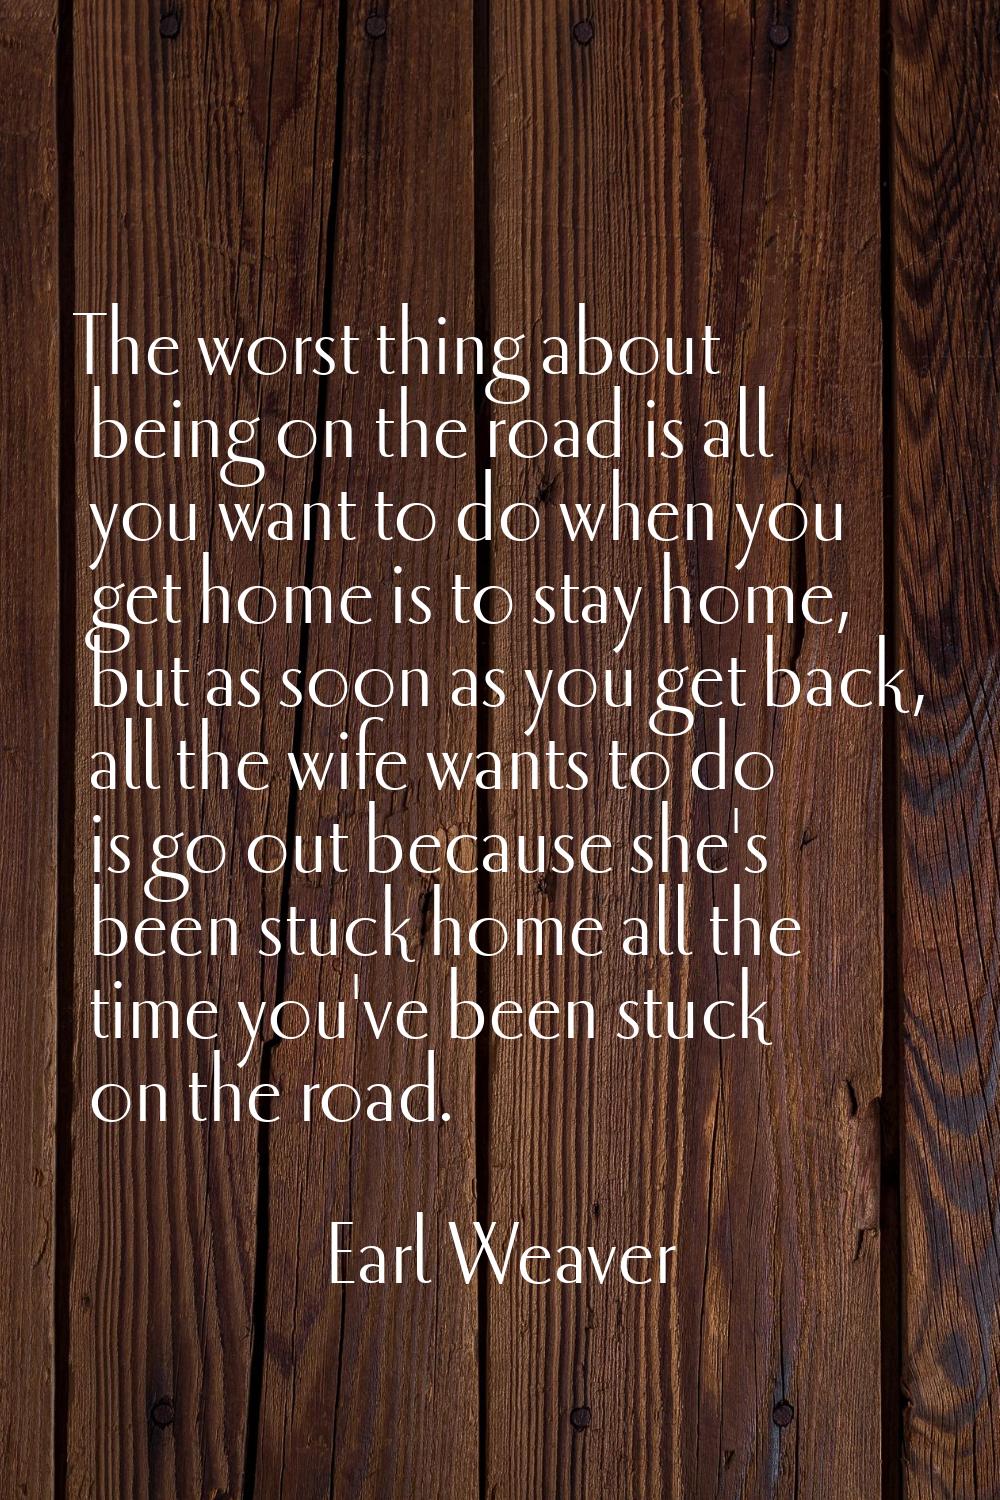 The worst thing about being on the road is all you want to do when you get home is to stay home, bu